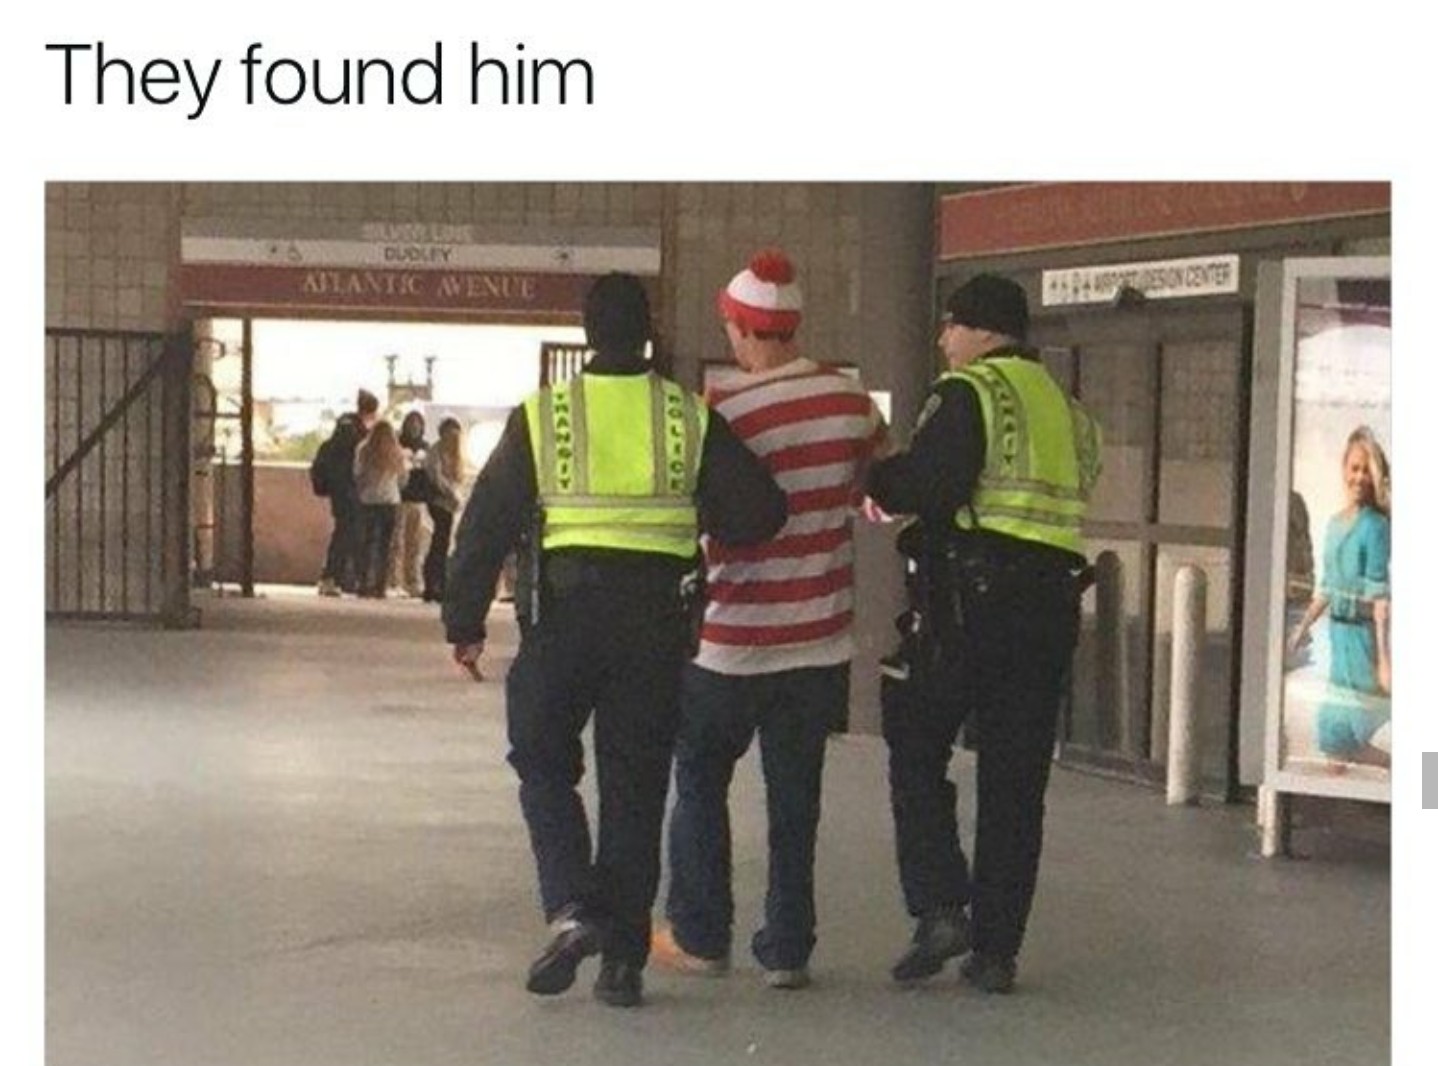 Police arresting someone that is dressed like Where's Waldo